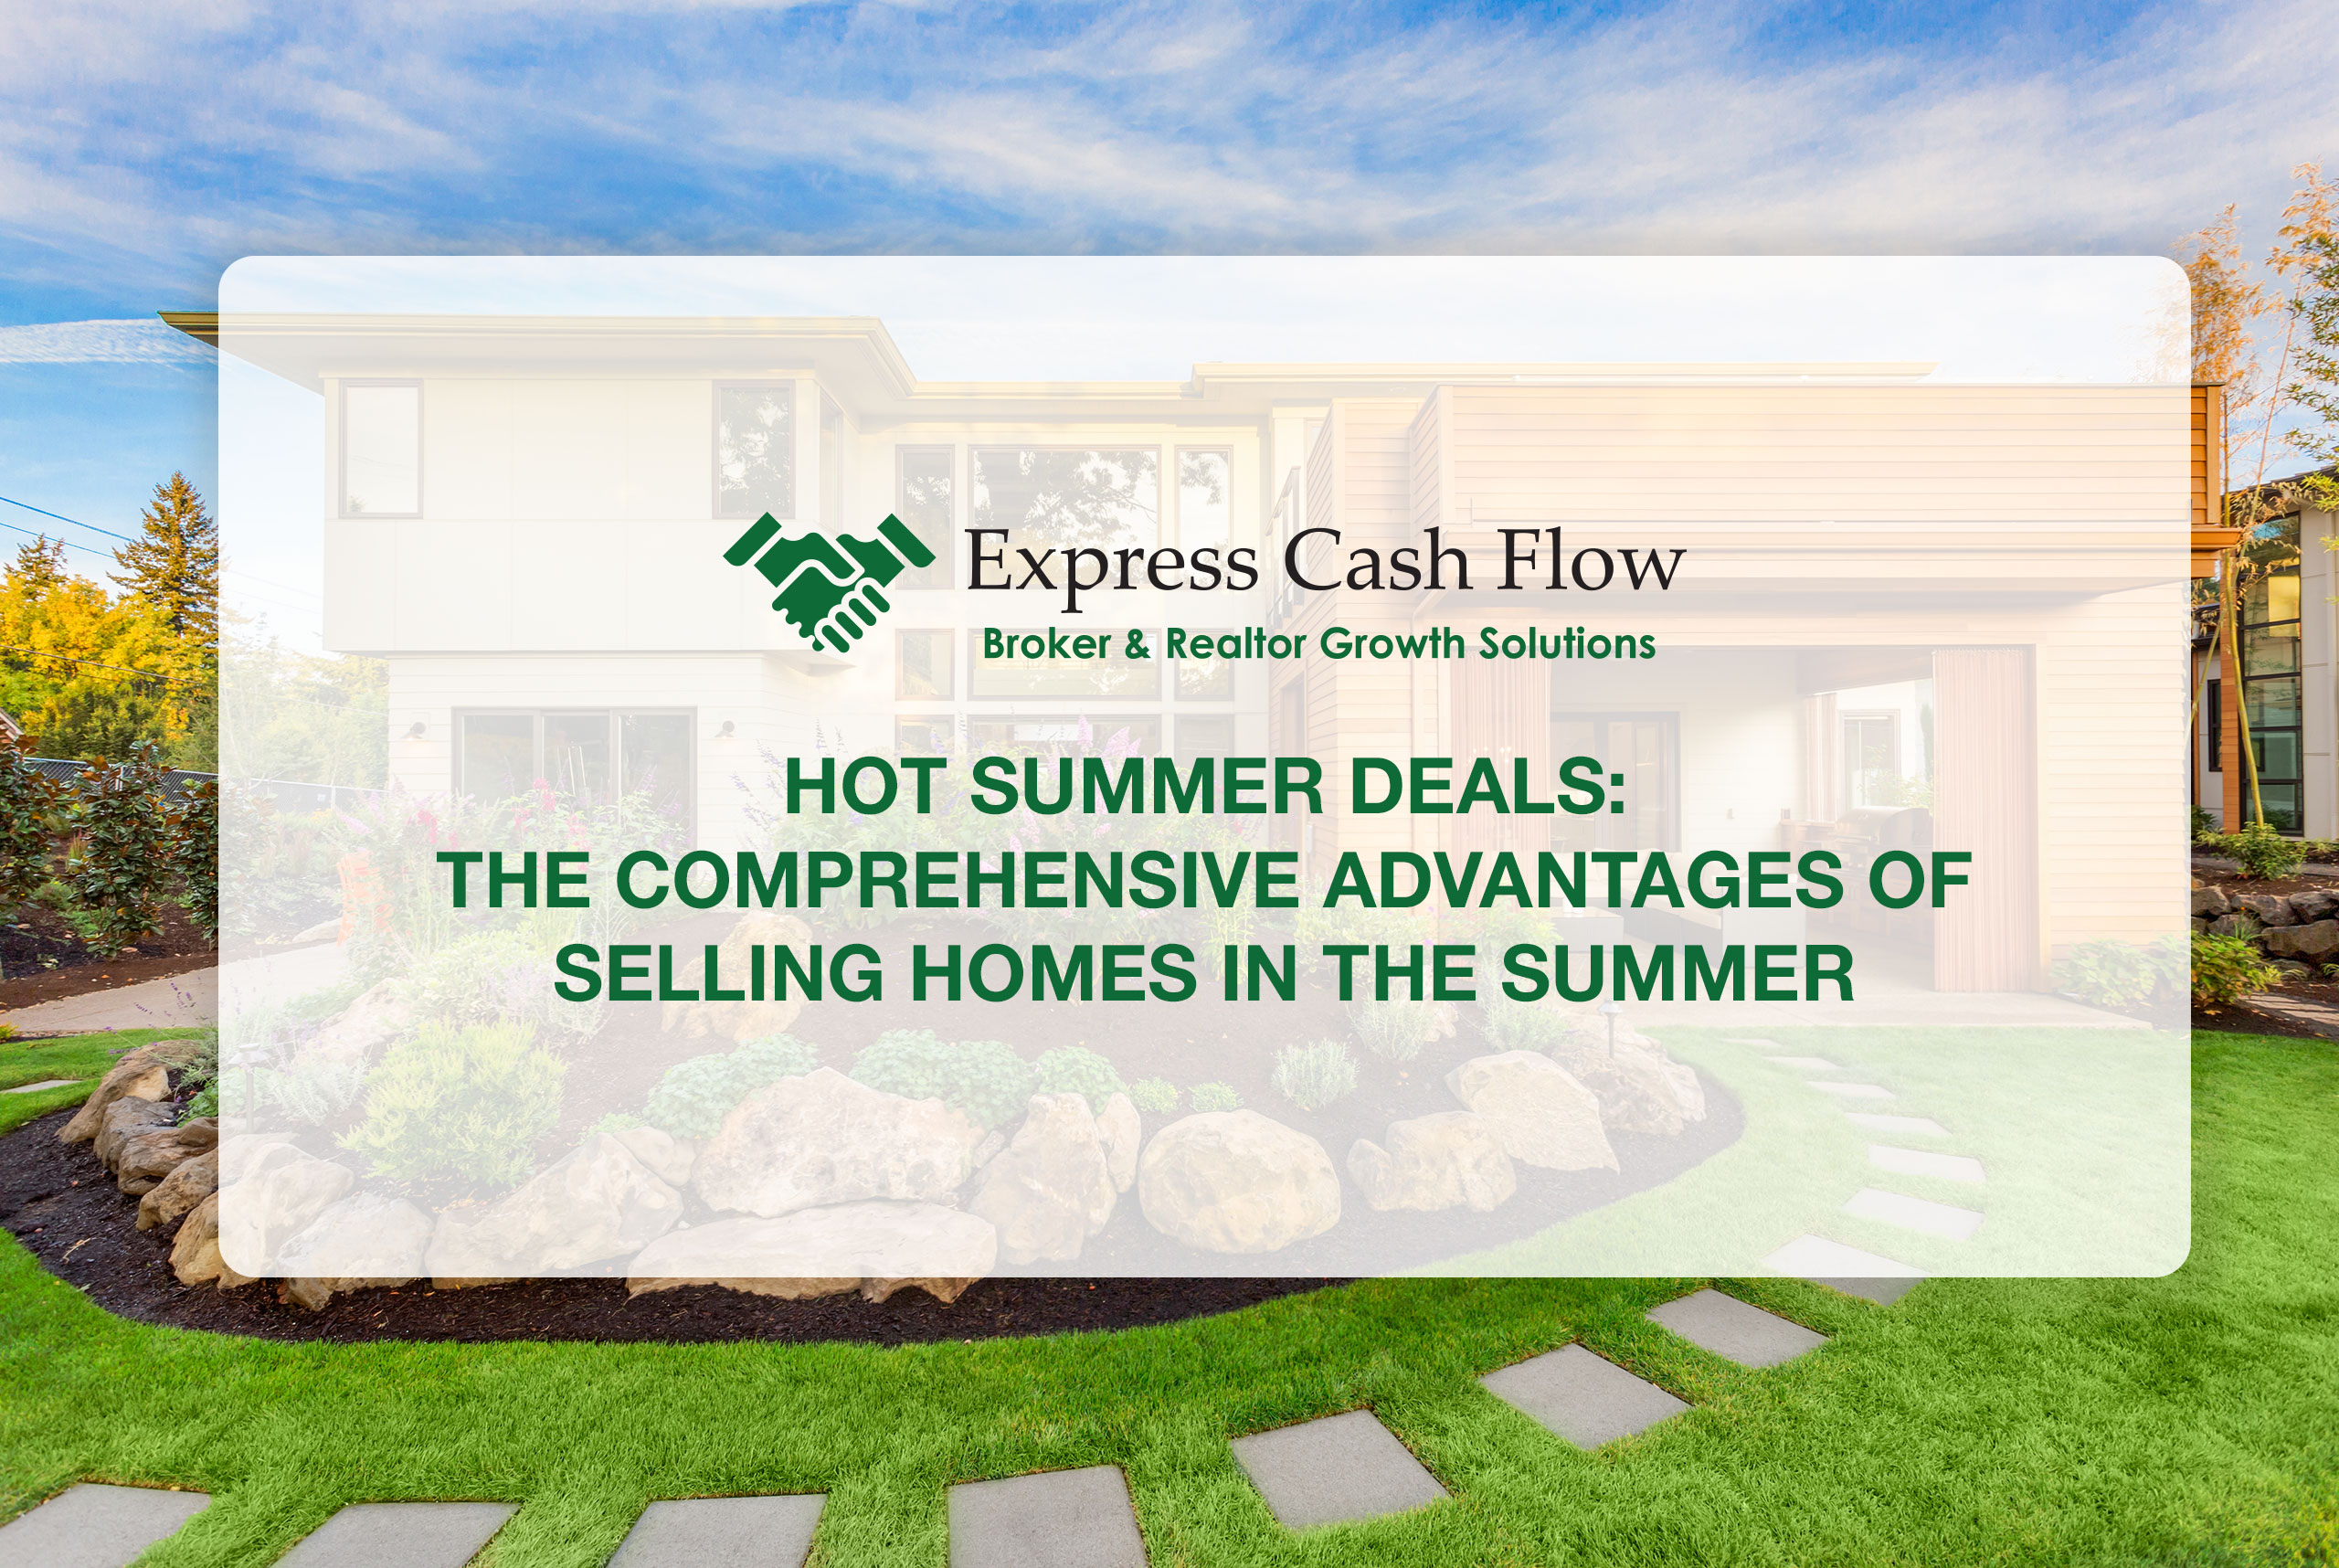 Hot-Summer-Deals--The-Comprehensive-Advantages-of-Selling-Homes-in-the-Summer